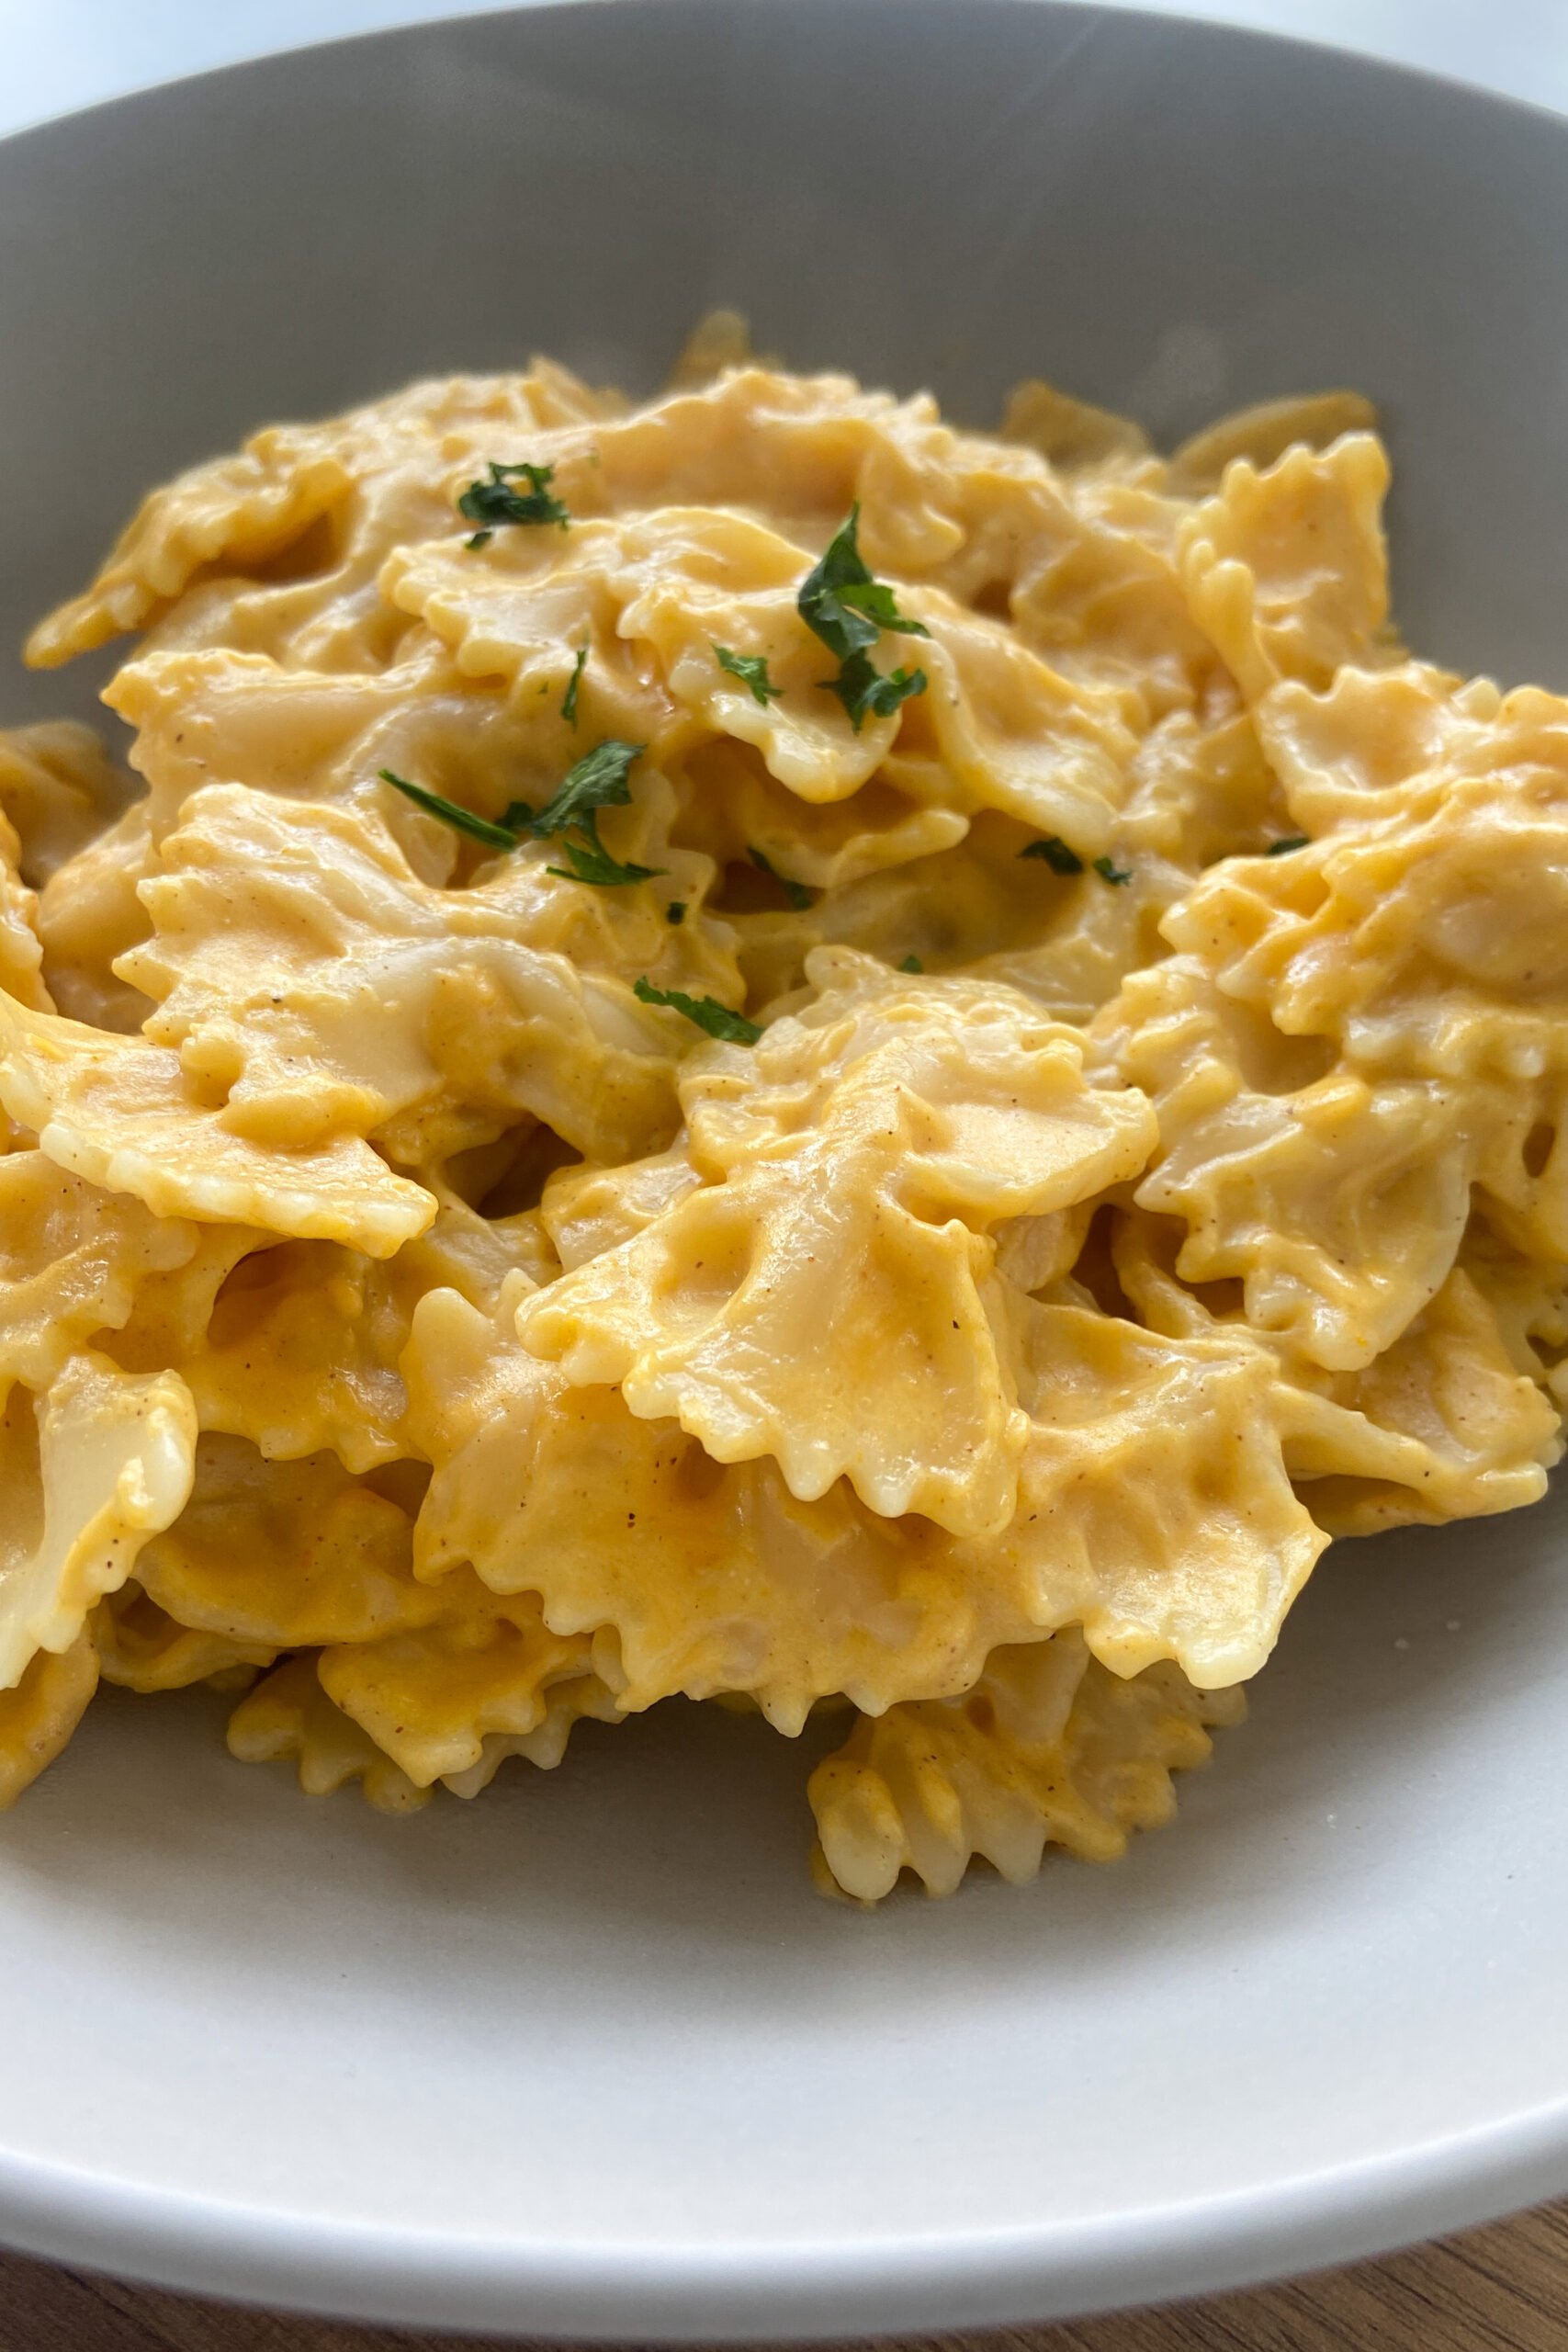 Creamy pumpkin pasta garnished with parsley flakes